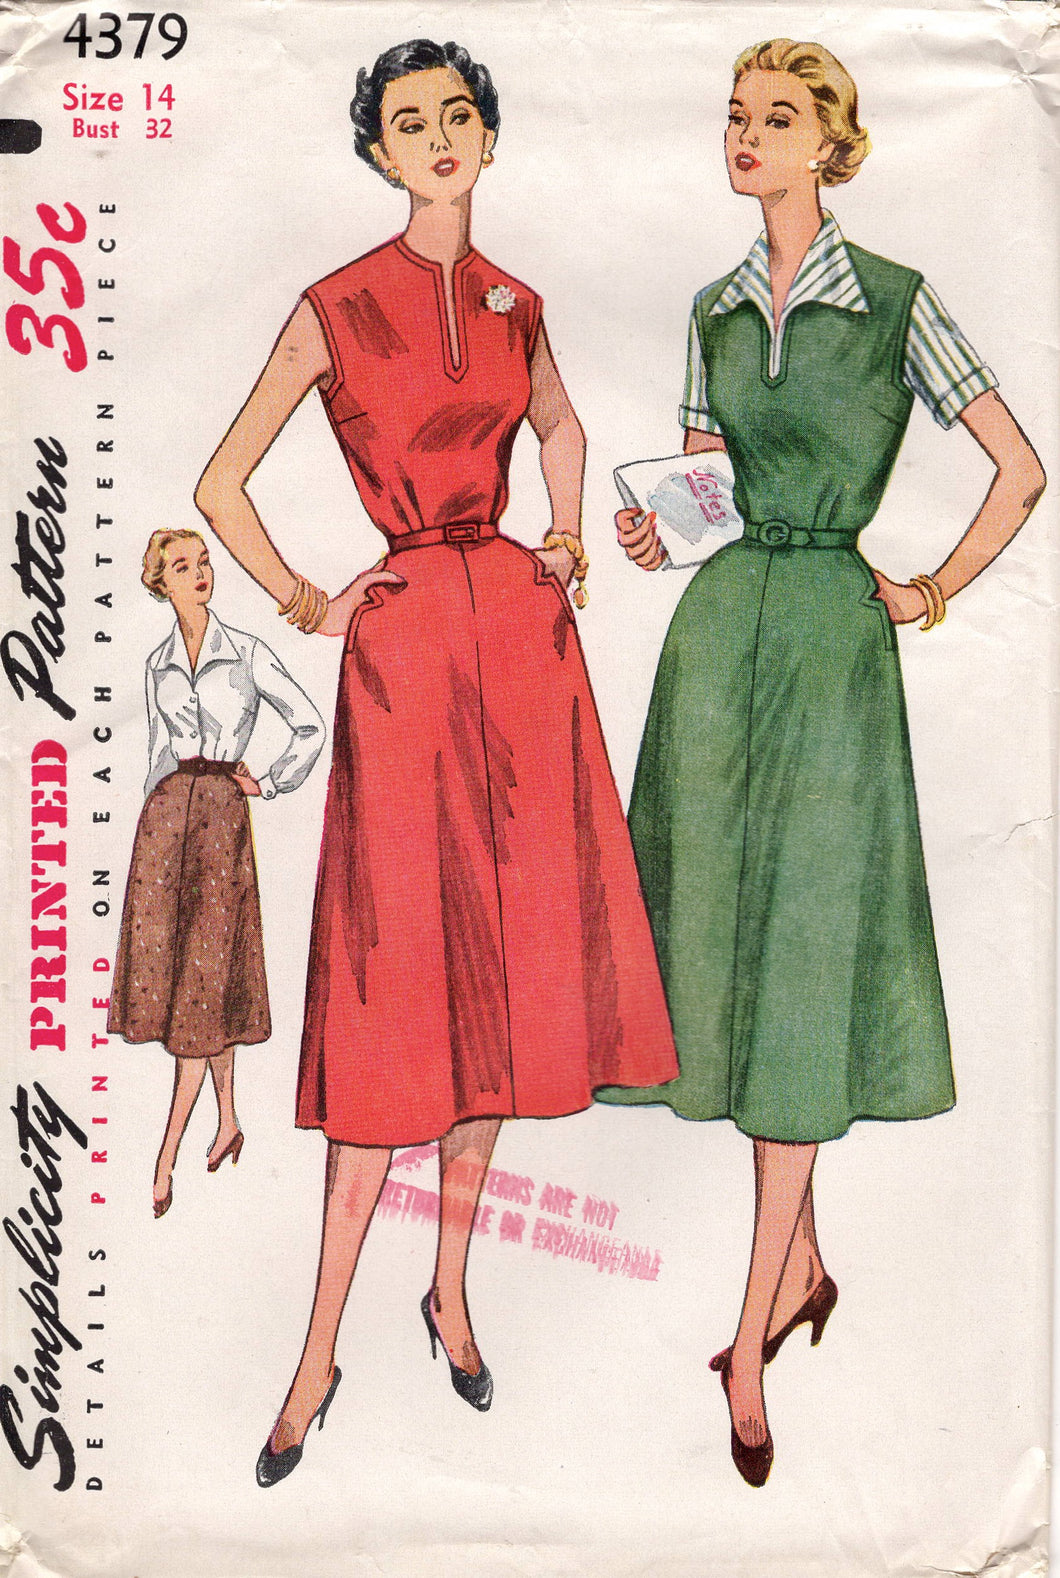 1950's Simplicity One Piece Jumper Dress Pattern and Blouse - Bust 32